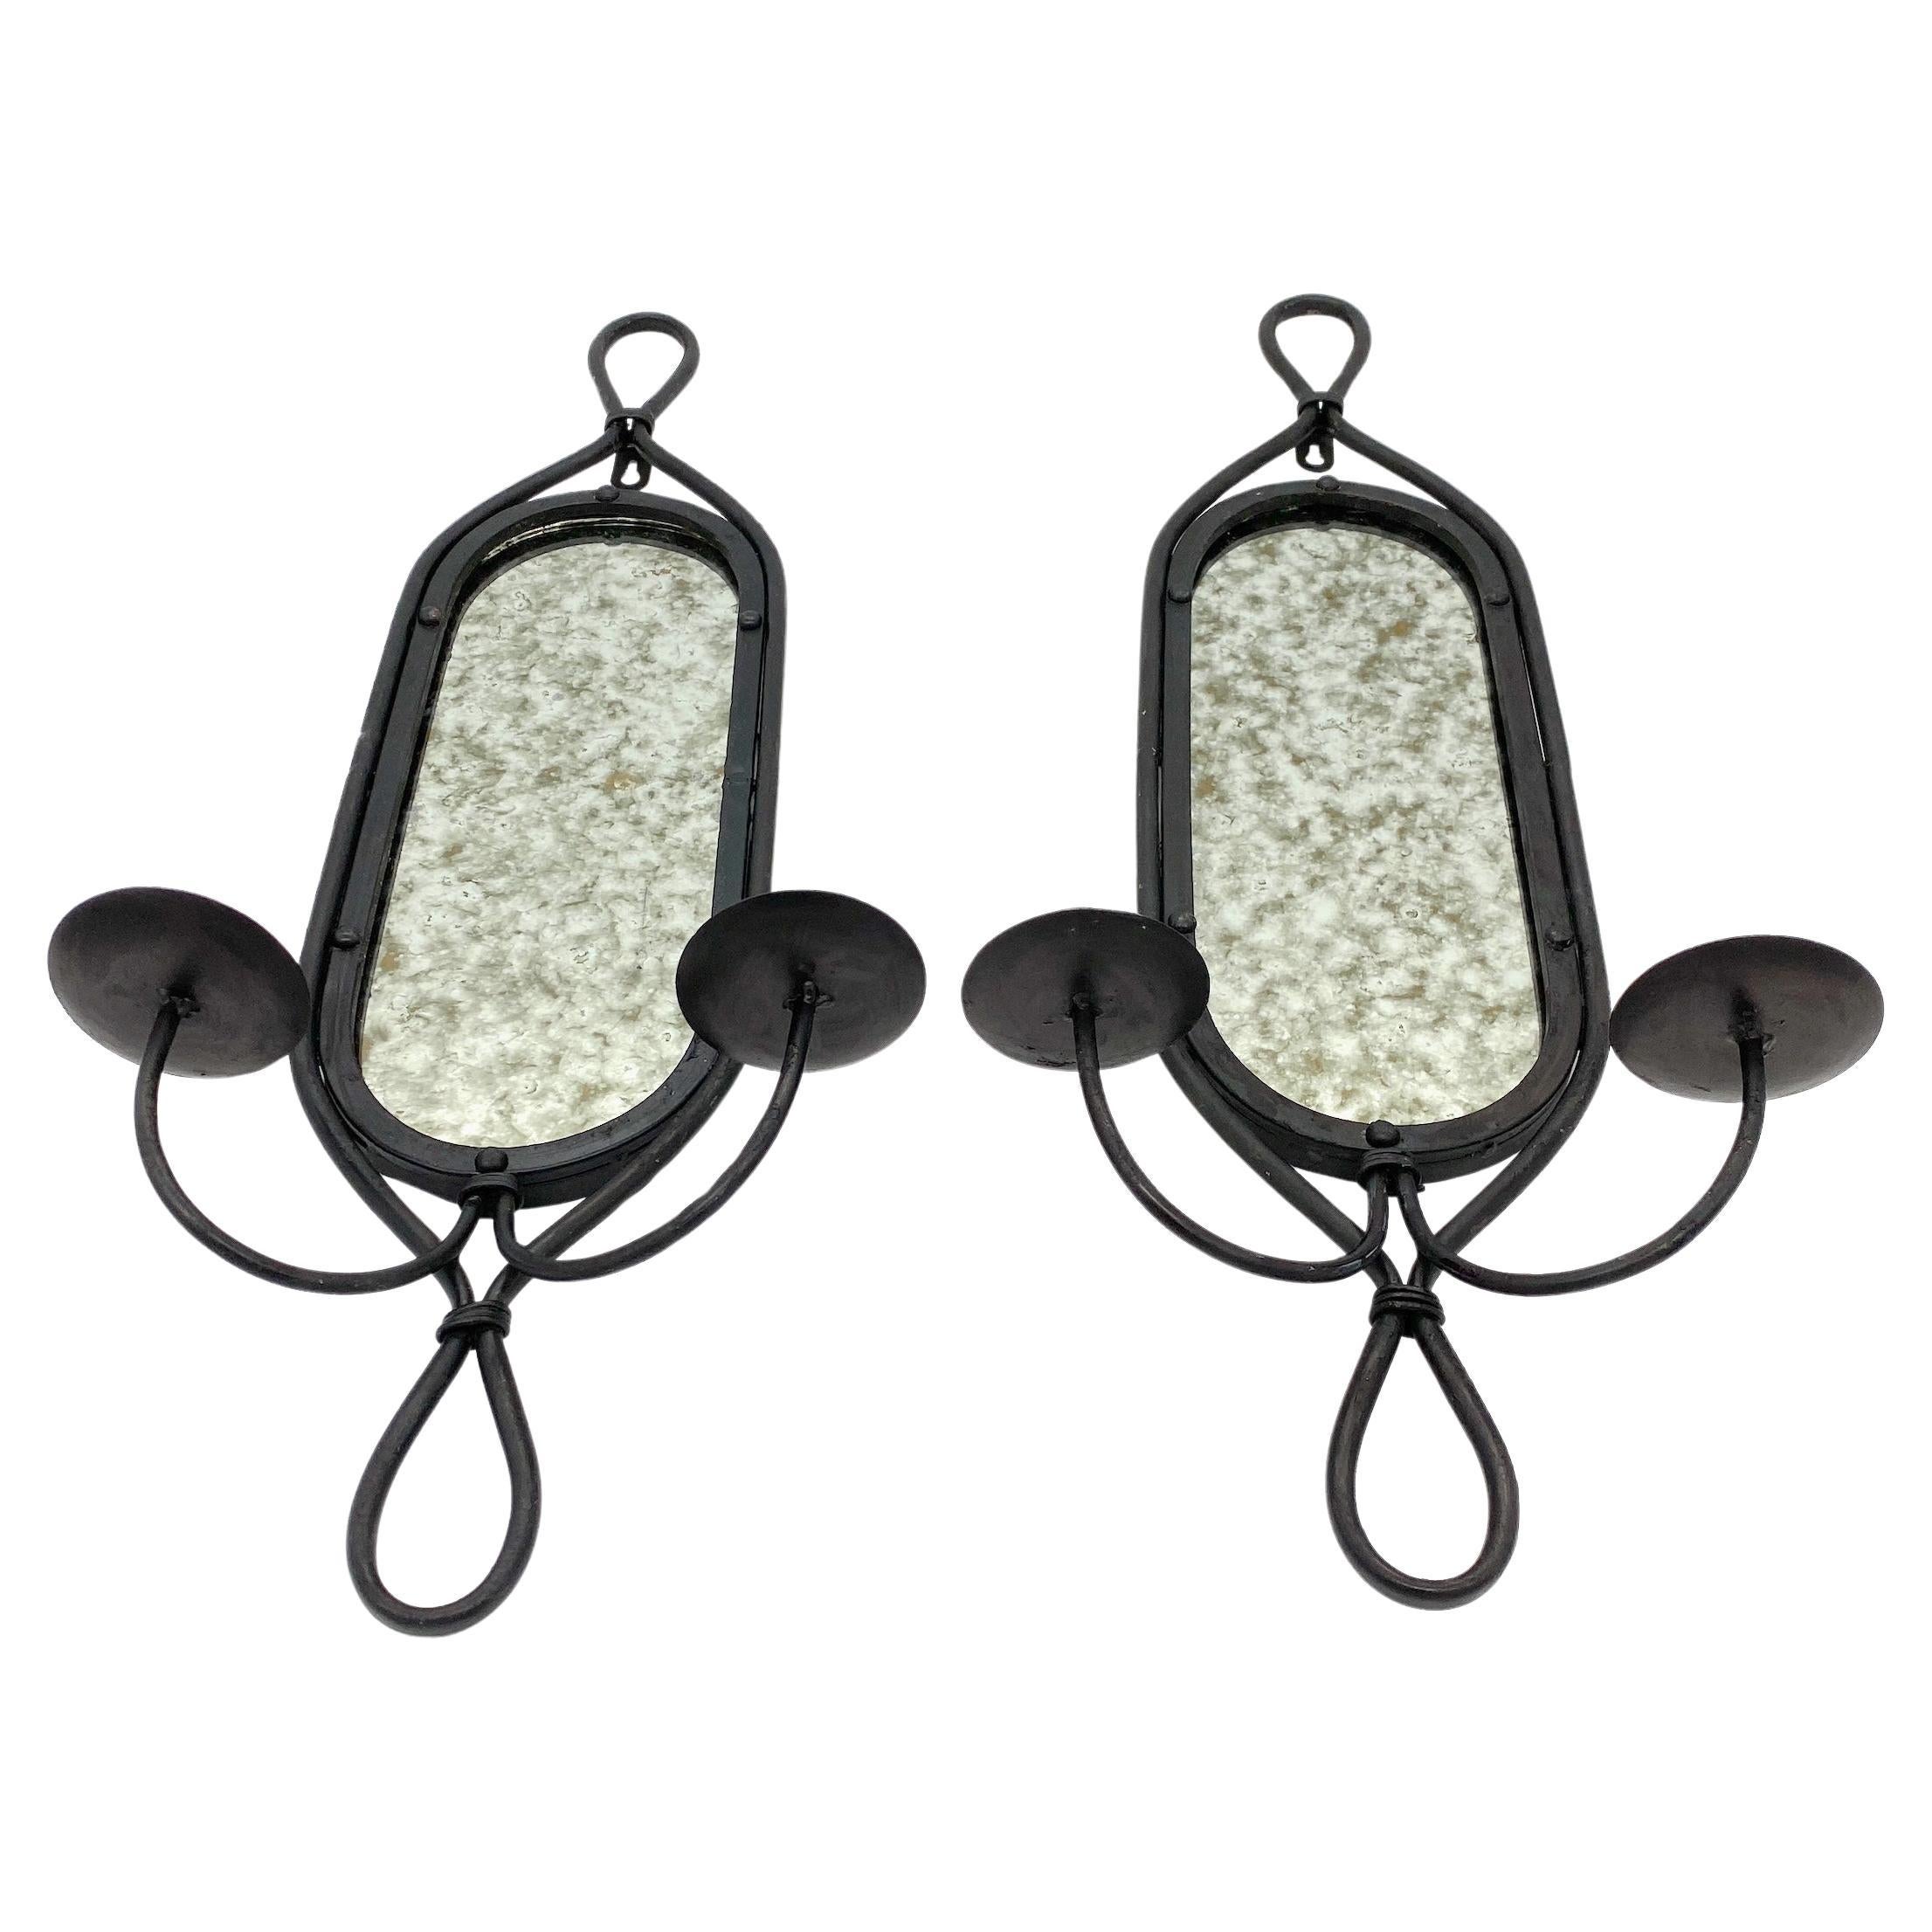 Pair French Modern Blackened Wrought Iron Mirror 2 Light Candle Sconces